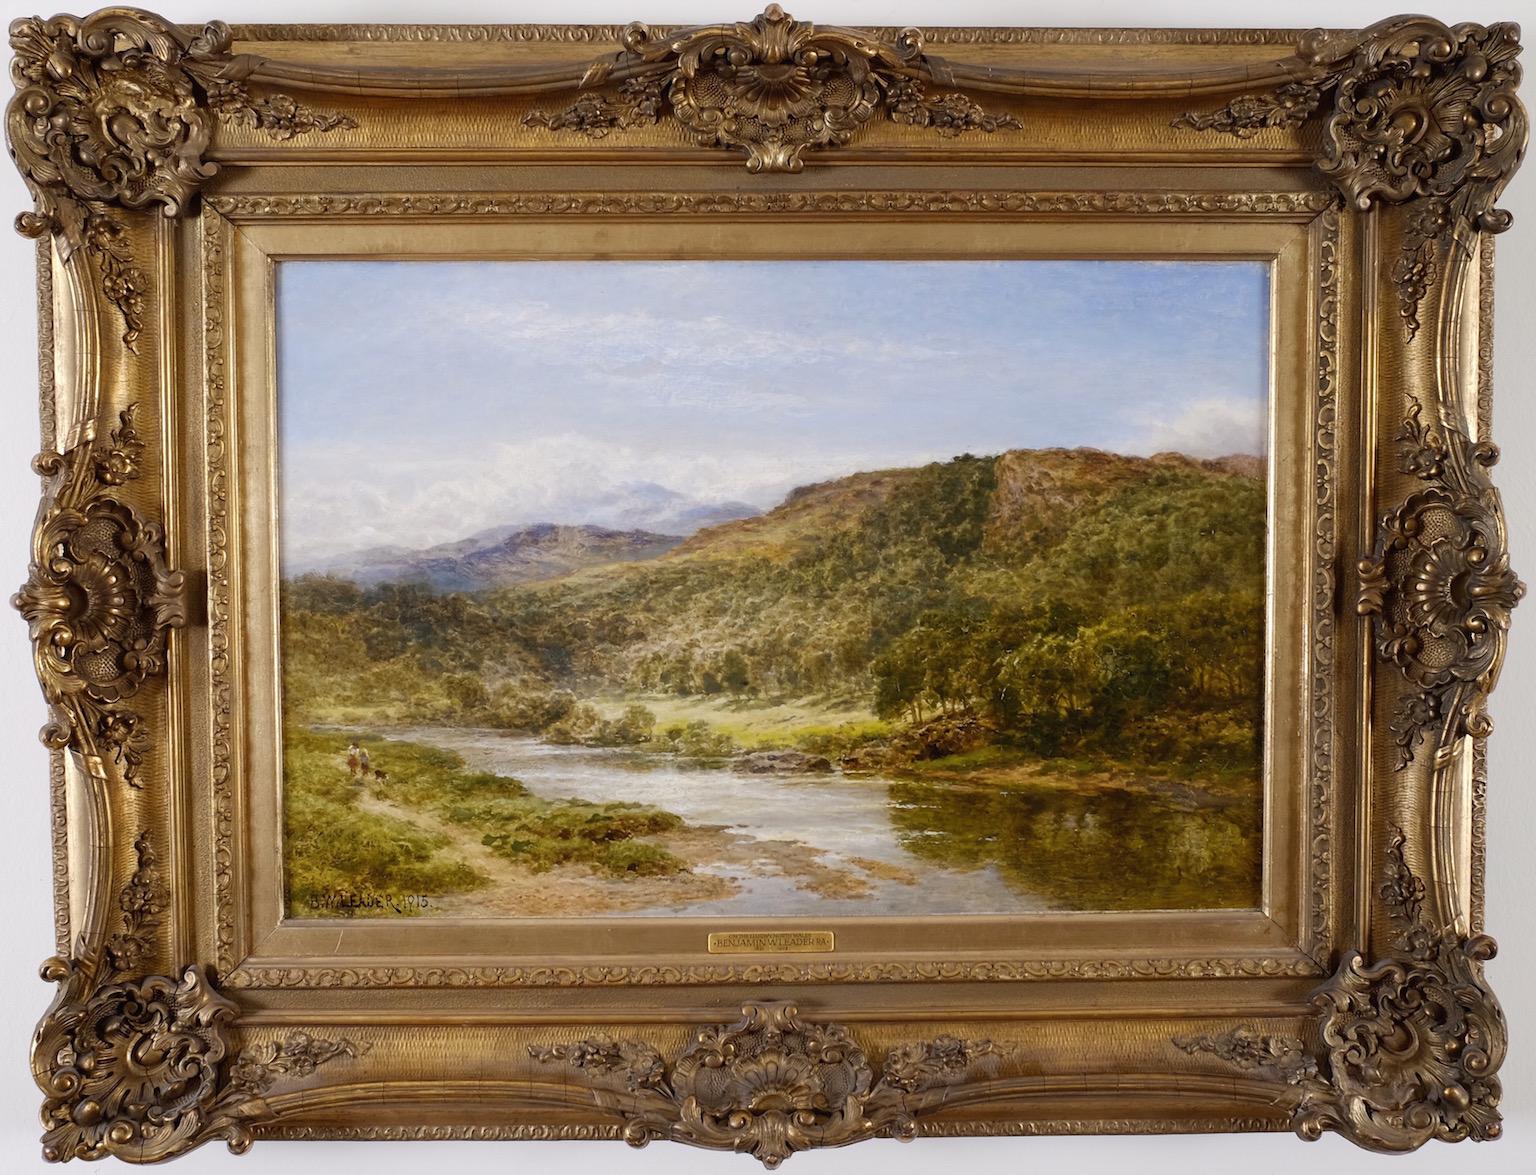 On the River Llugwy A Welsh Landscape with Fishermen - Painting by Benjamin Williams Leader